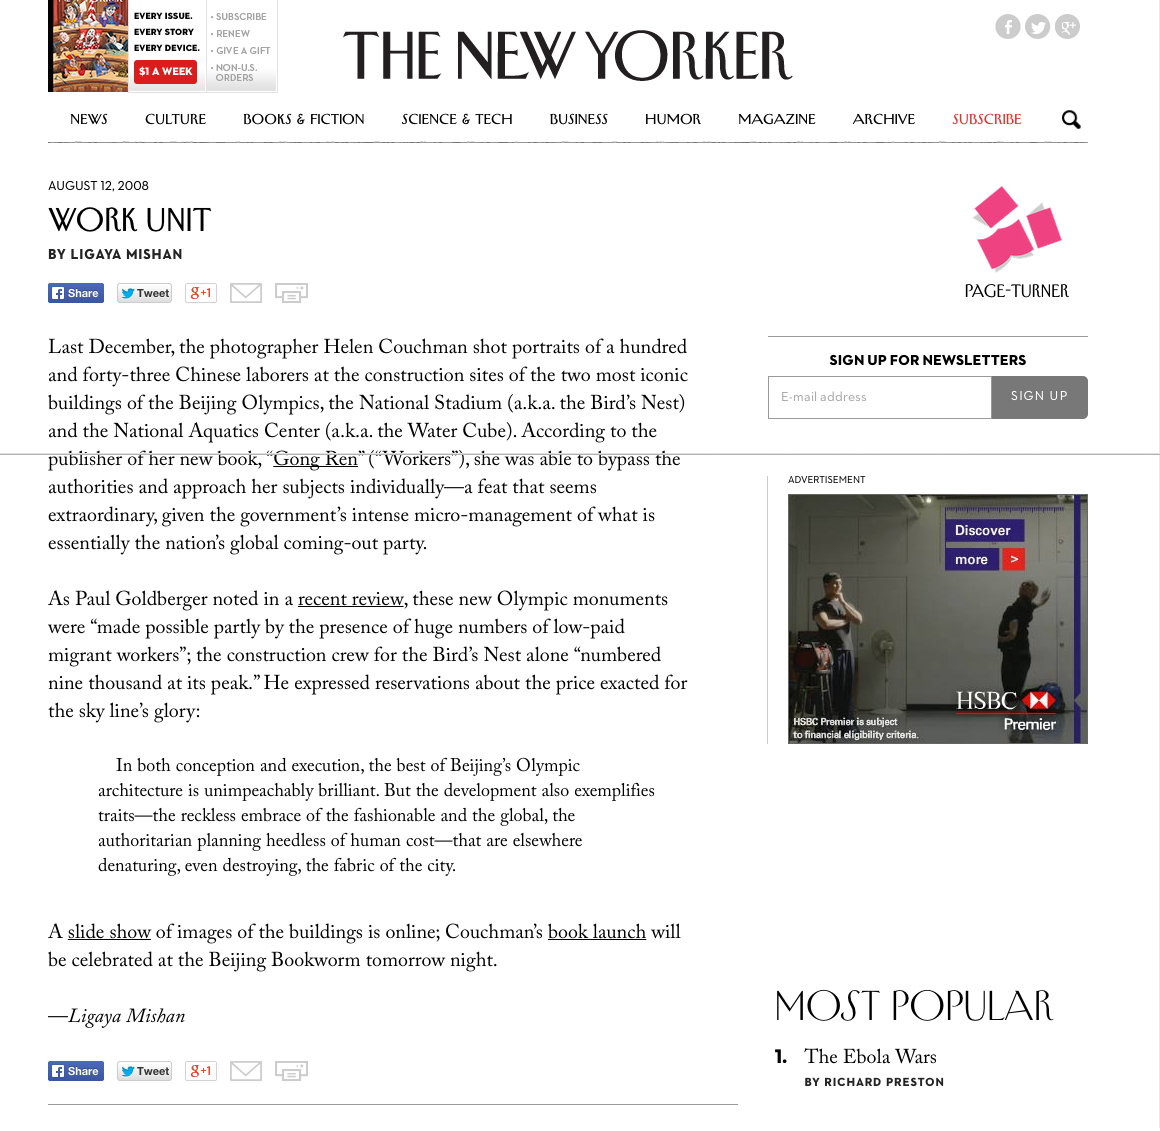 WORKERS in the New Yorker